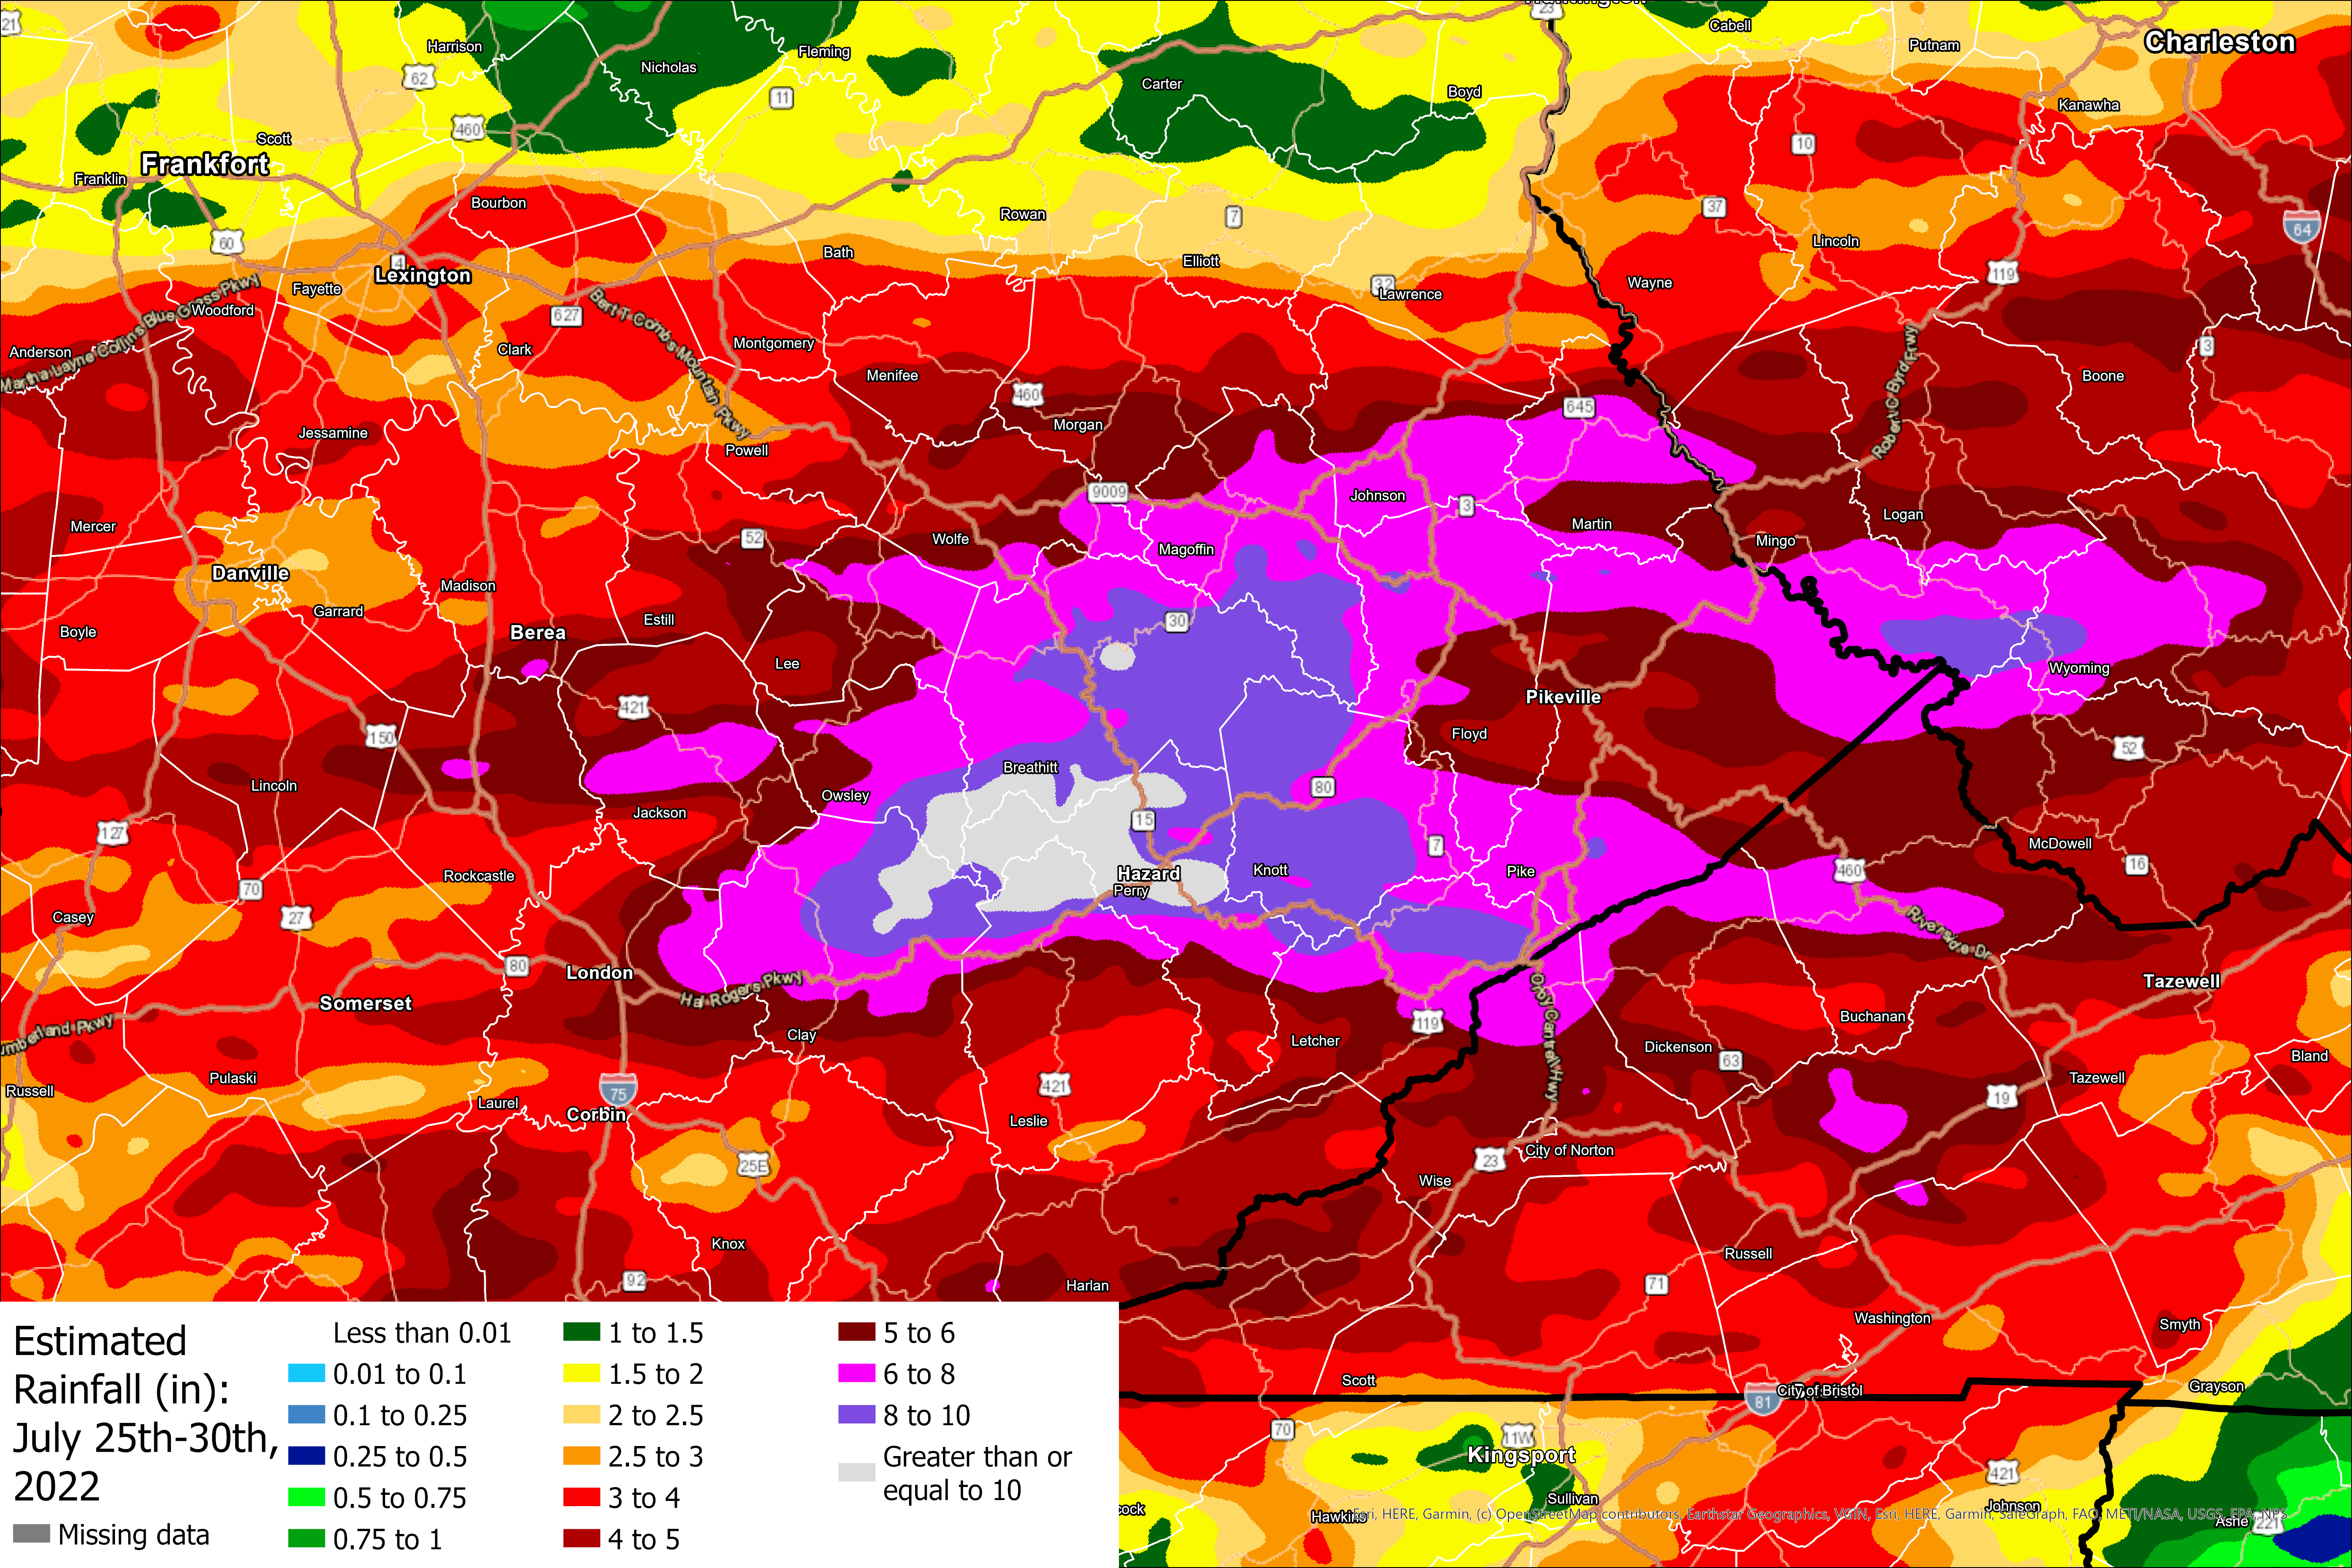 Historic July 26th-July 30th, 2022 Eastern Kentucky Flooding